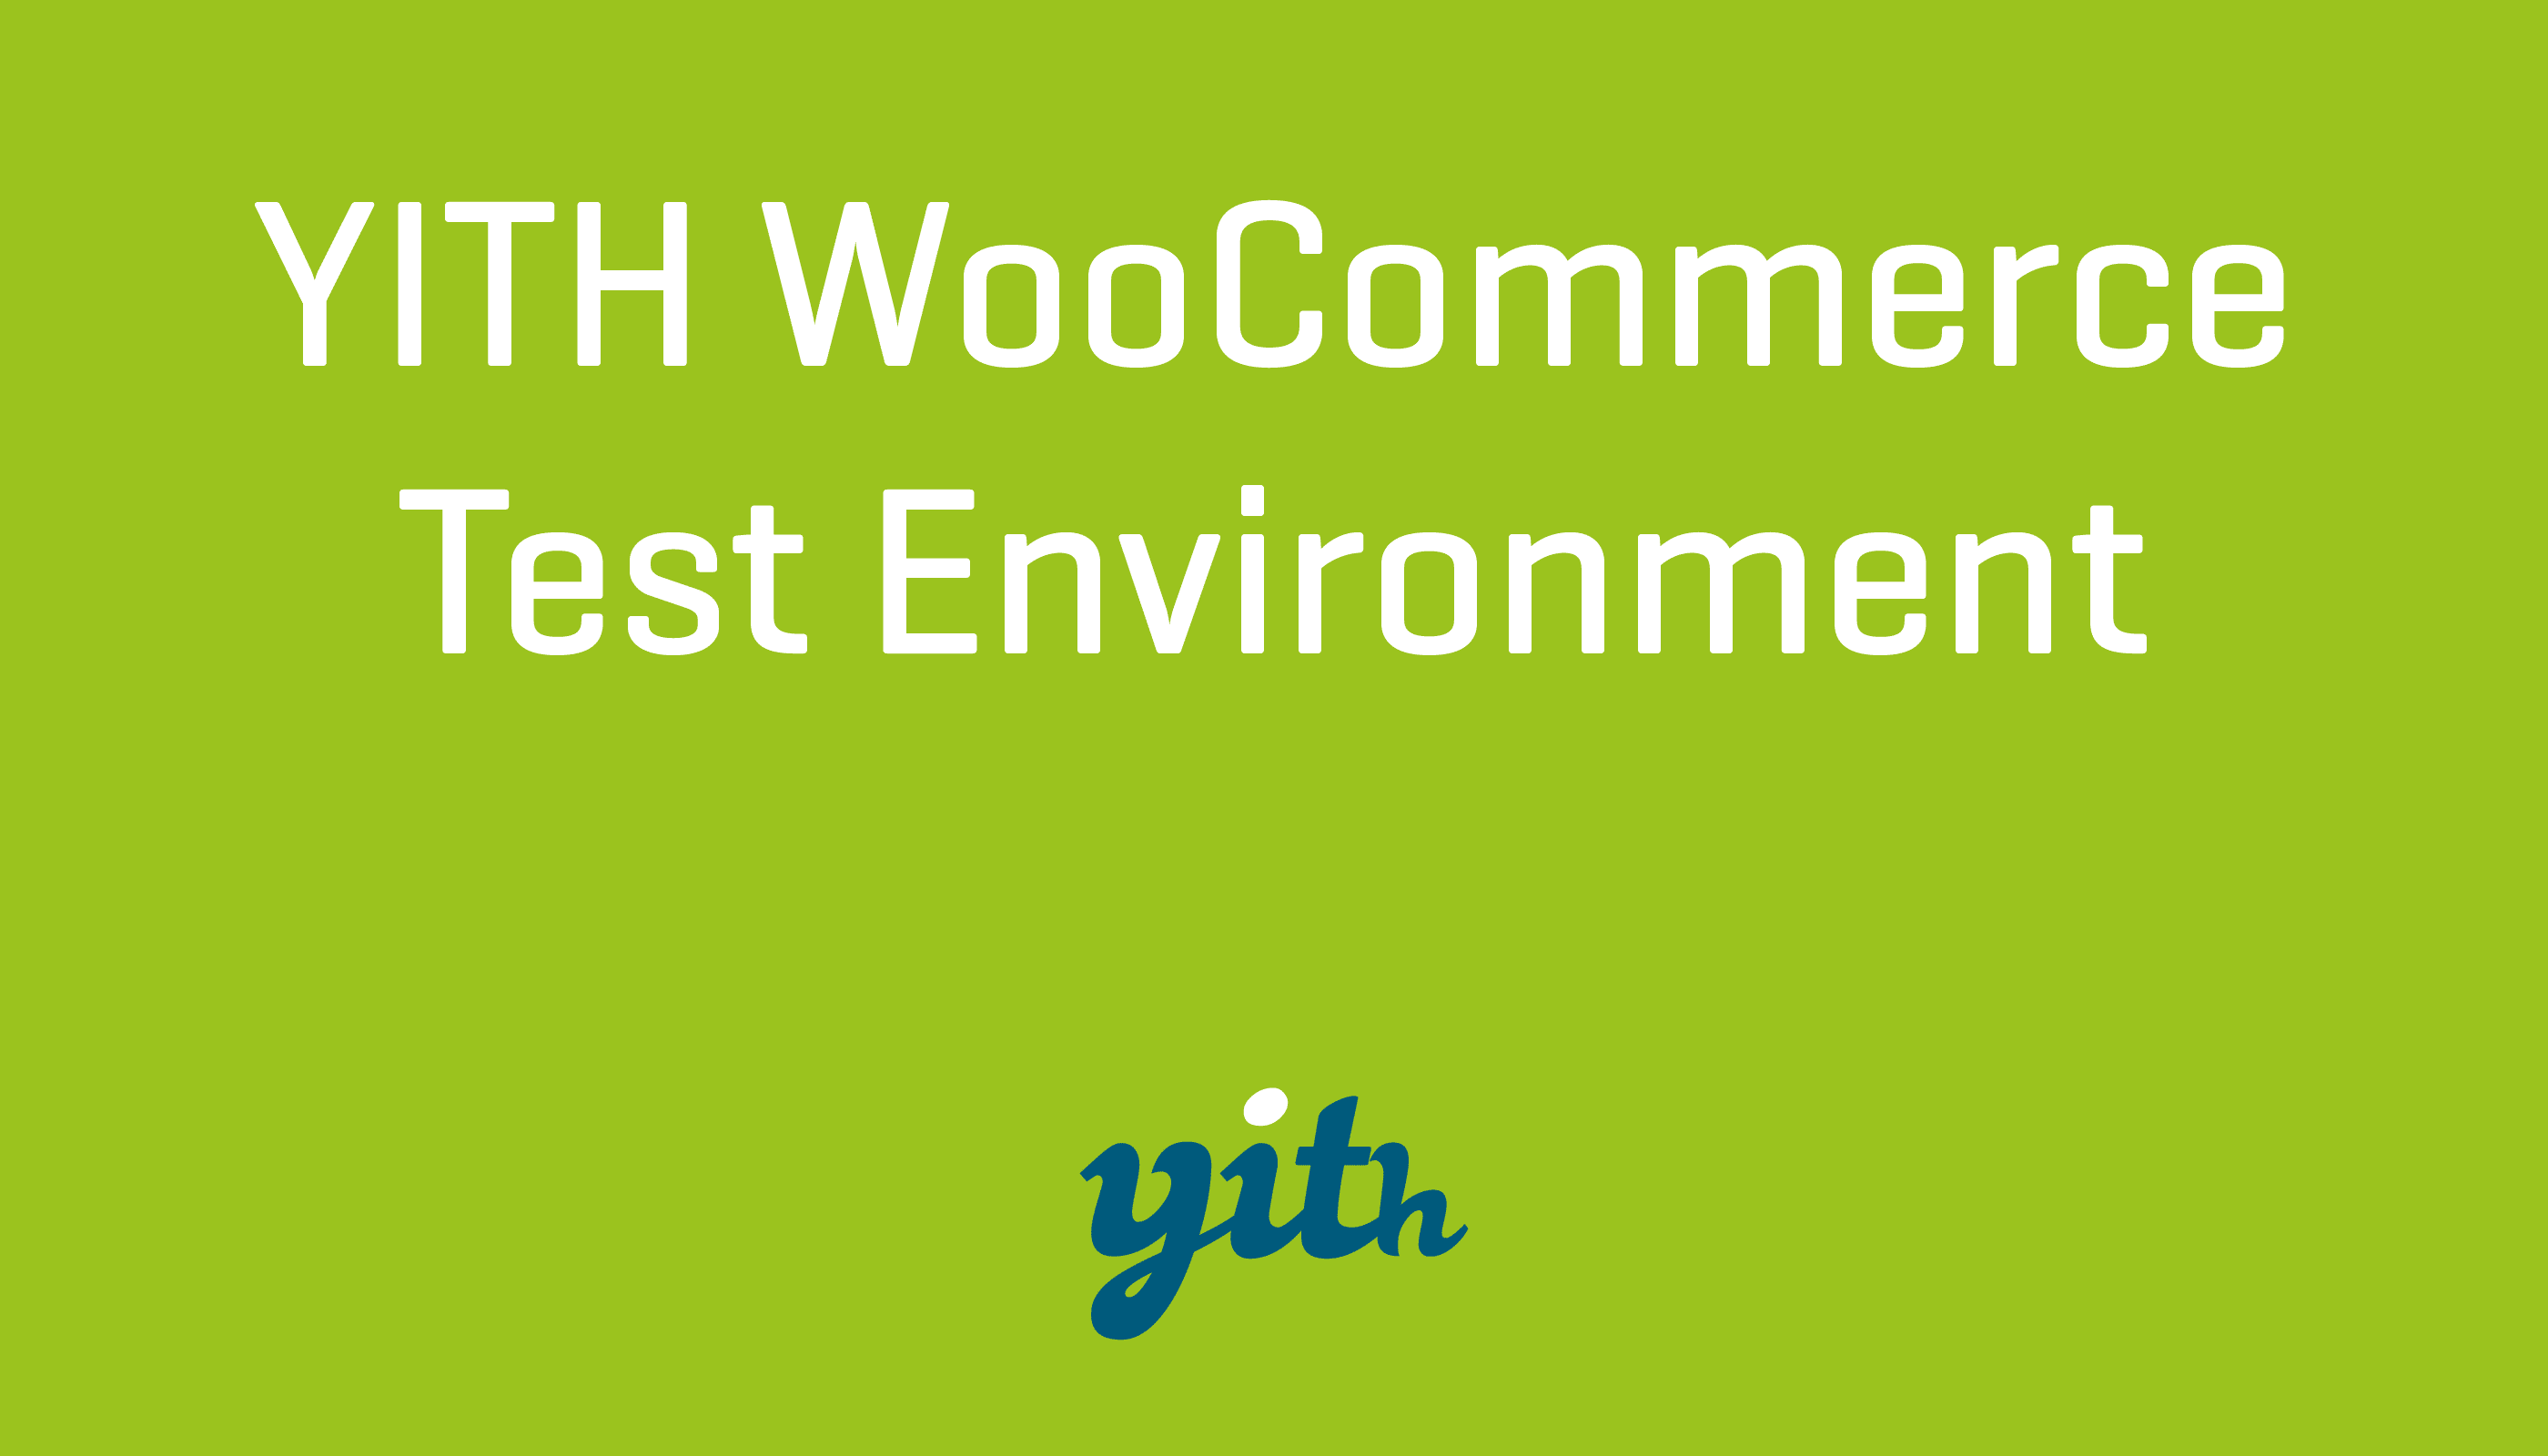 YITH WooCommerce Test Environment